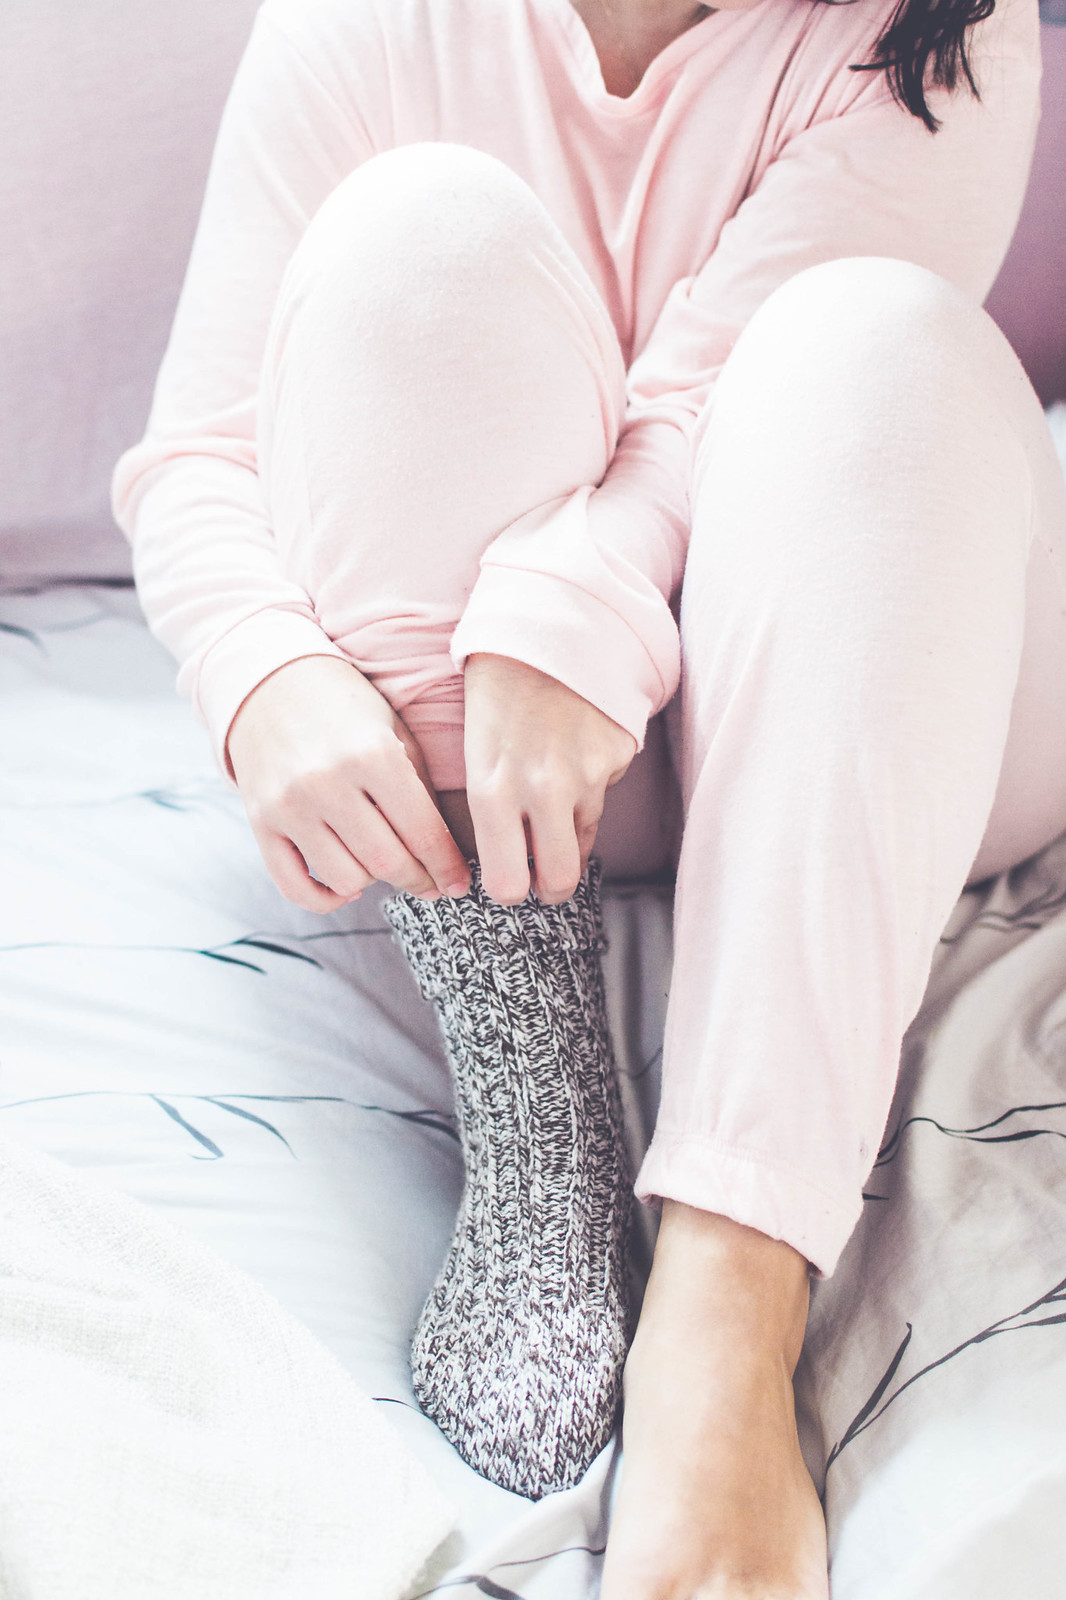 Between my top lounging products: the softer pink PJs by Chelsea Peers